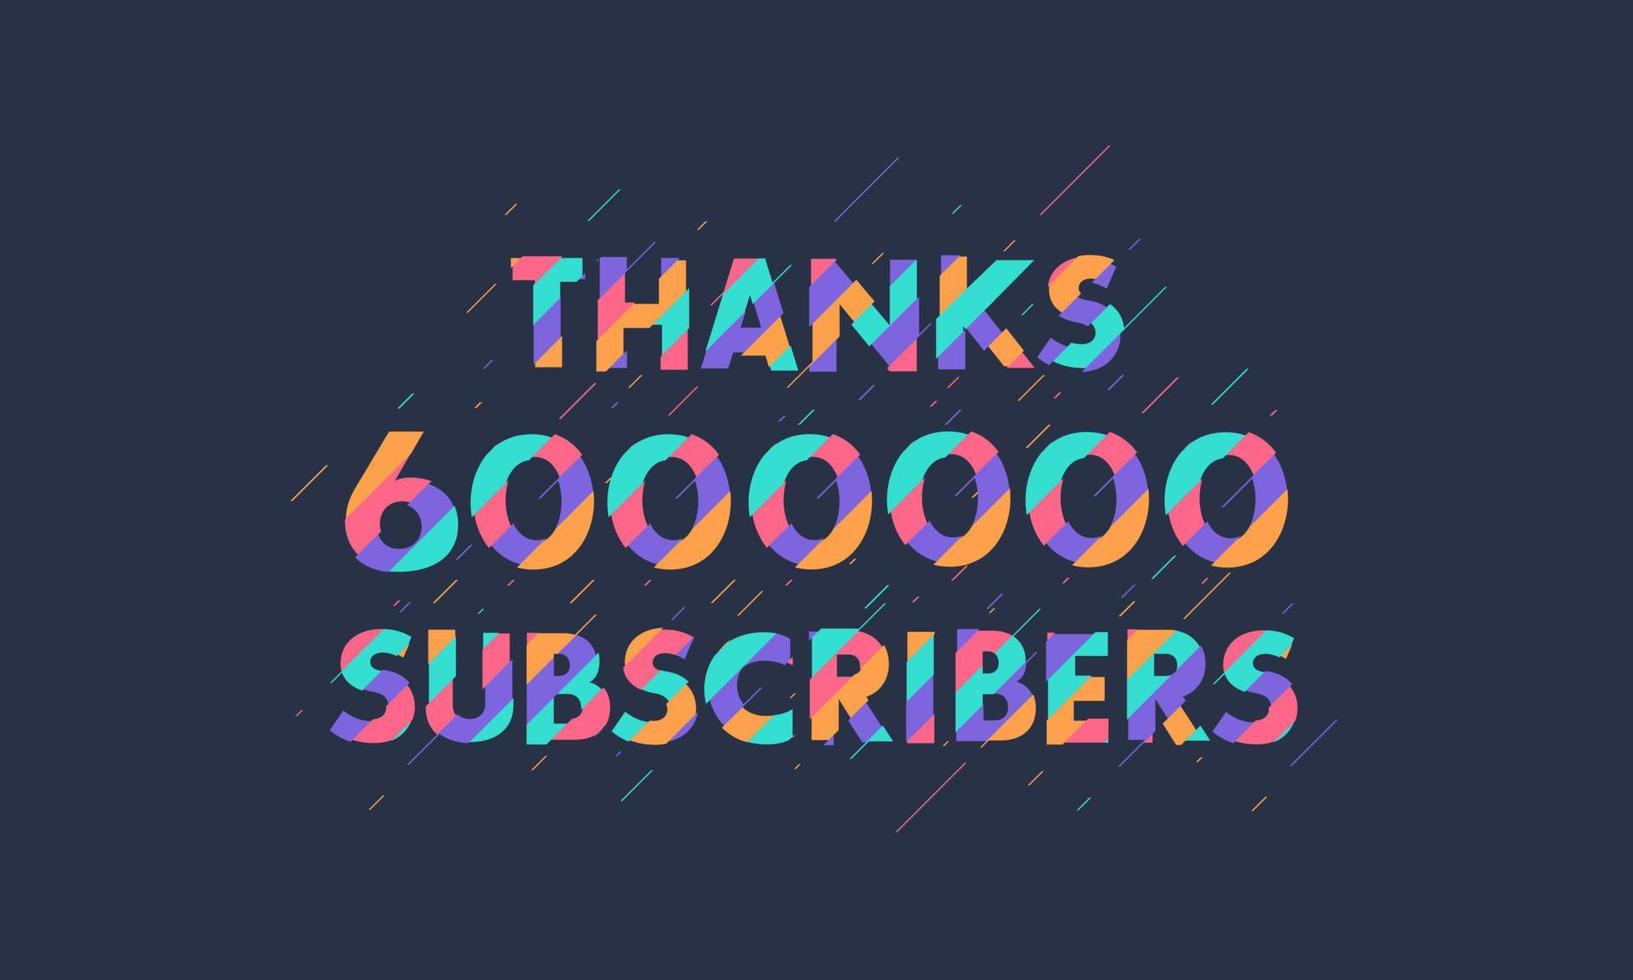 Thanks 6000000 subscribers, 6M subscribers celebration modern colorful design. vector